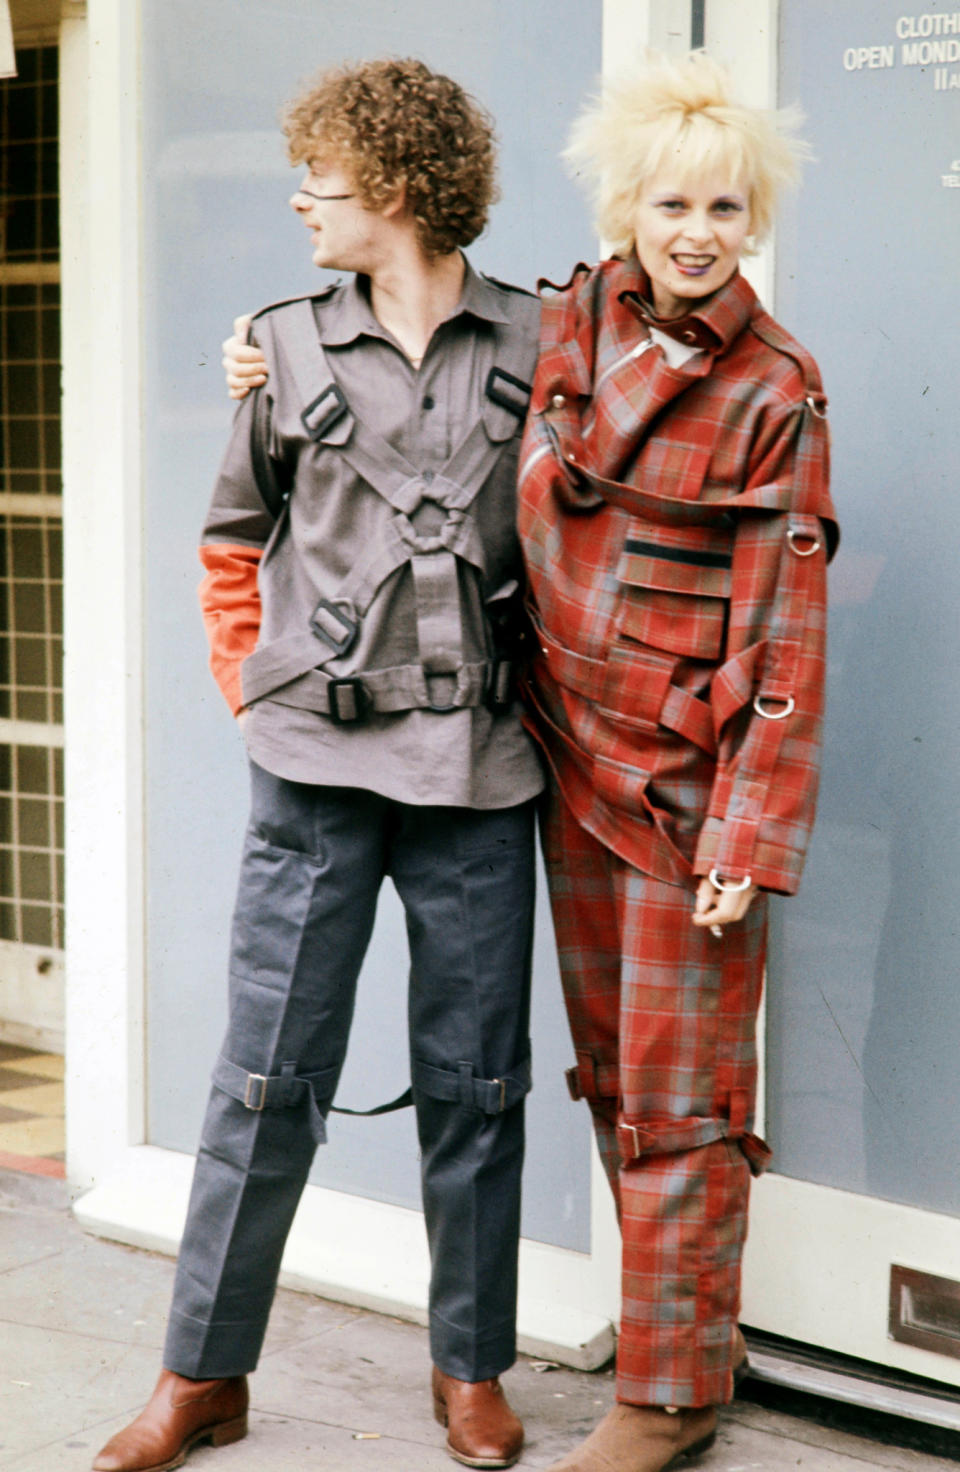 Vivienne Westwood  with Malcolm McLaren in their Seditionaries Clothes collection in 1977.